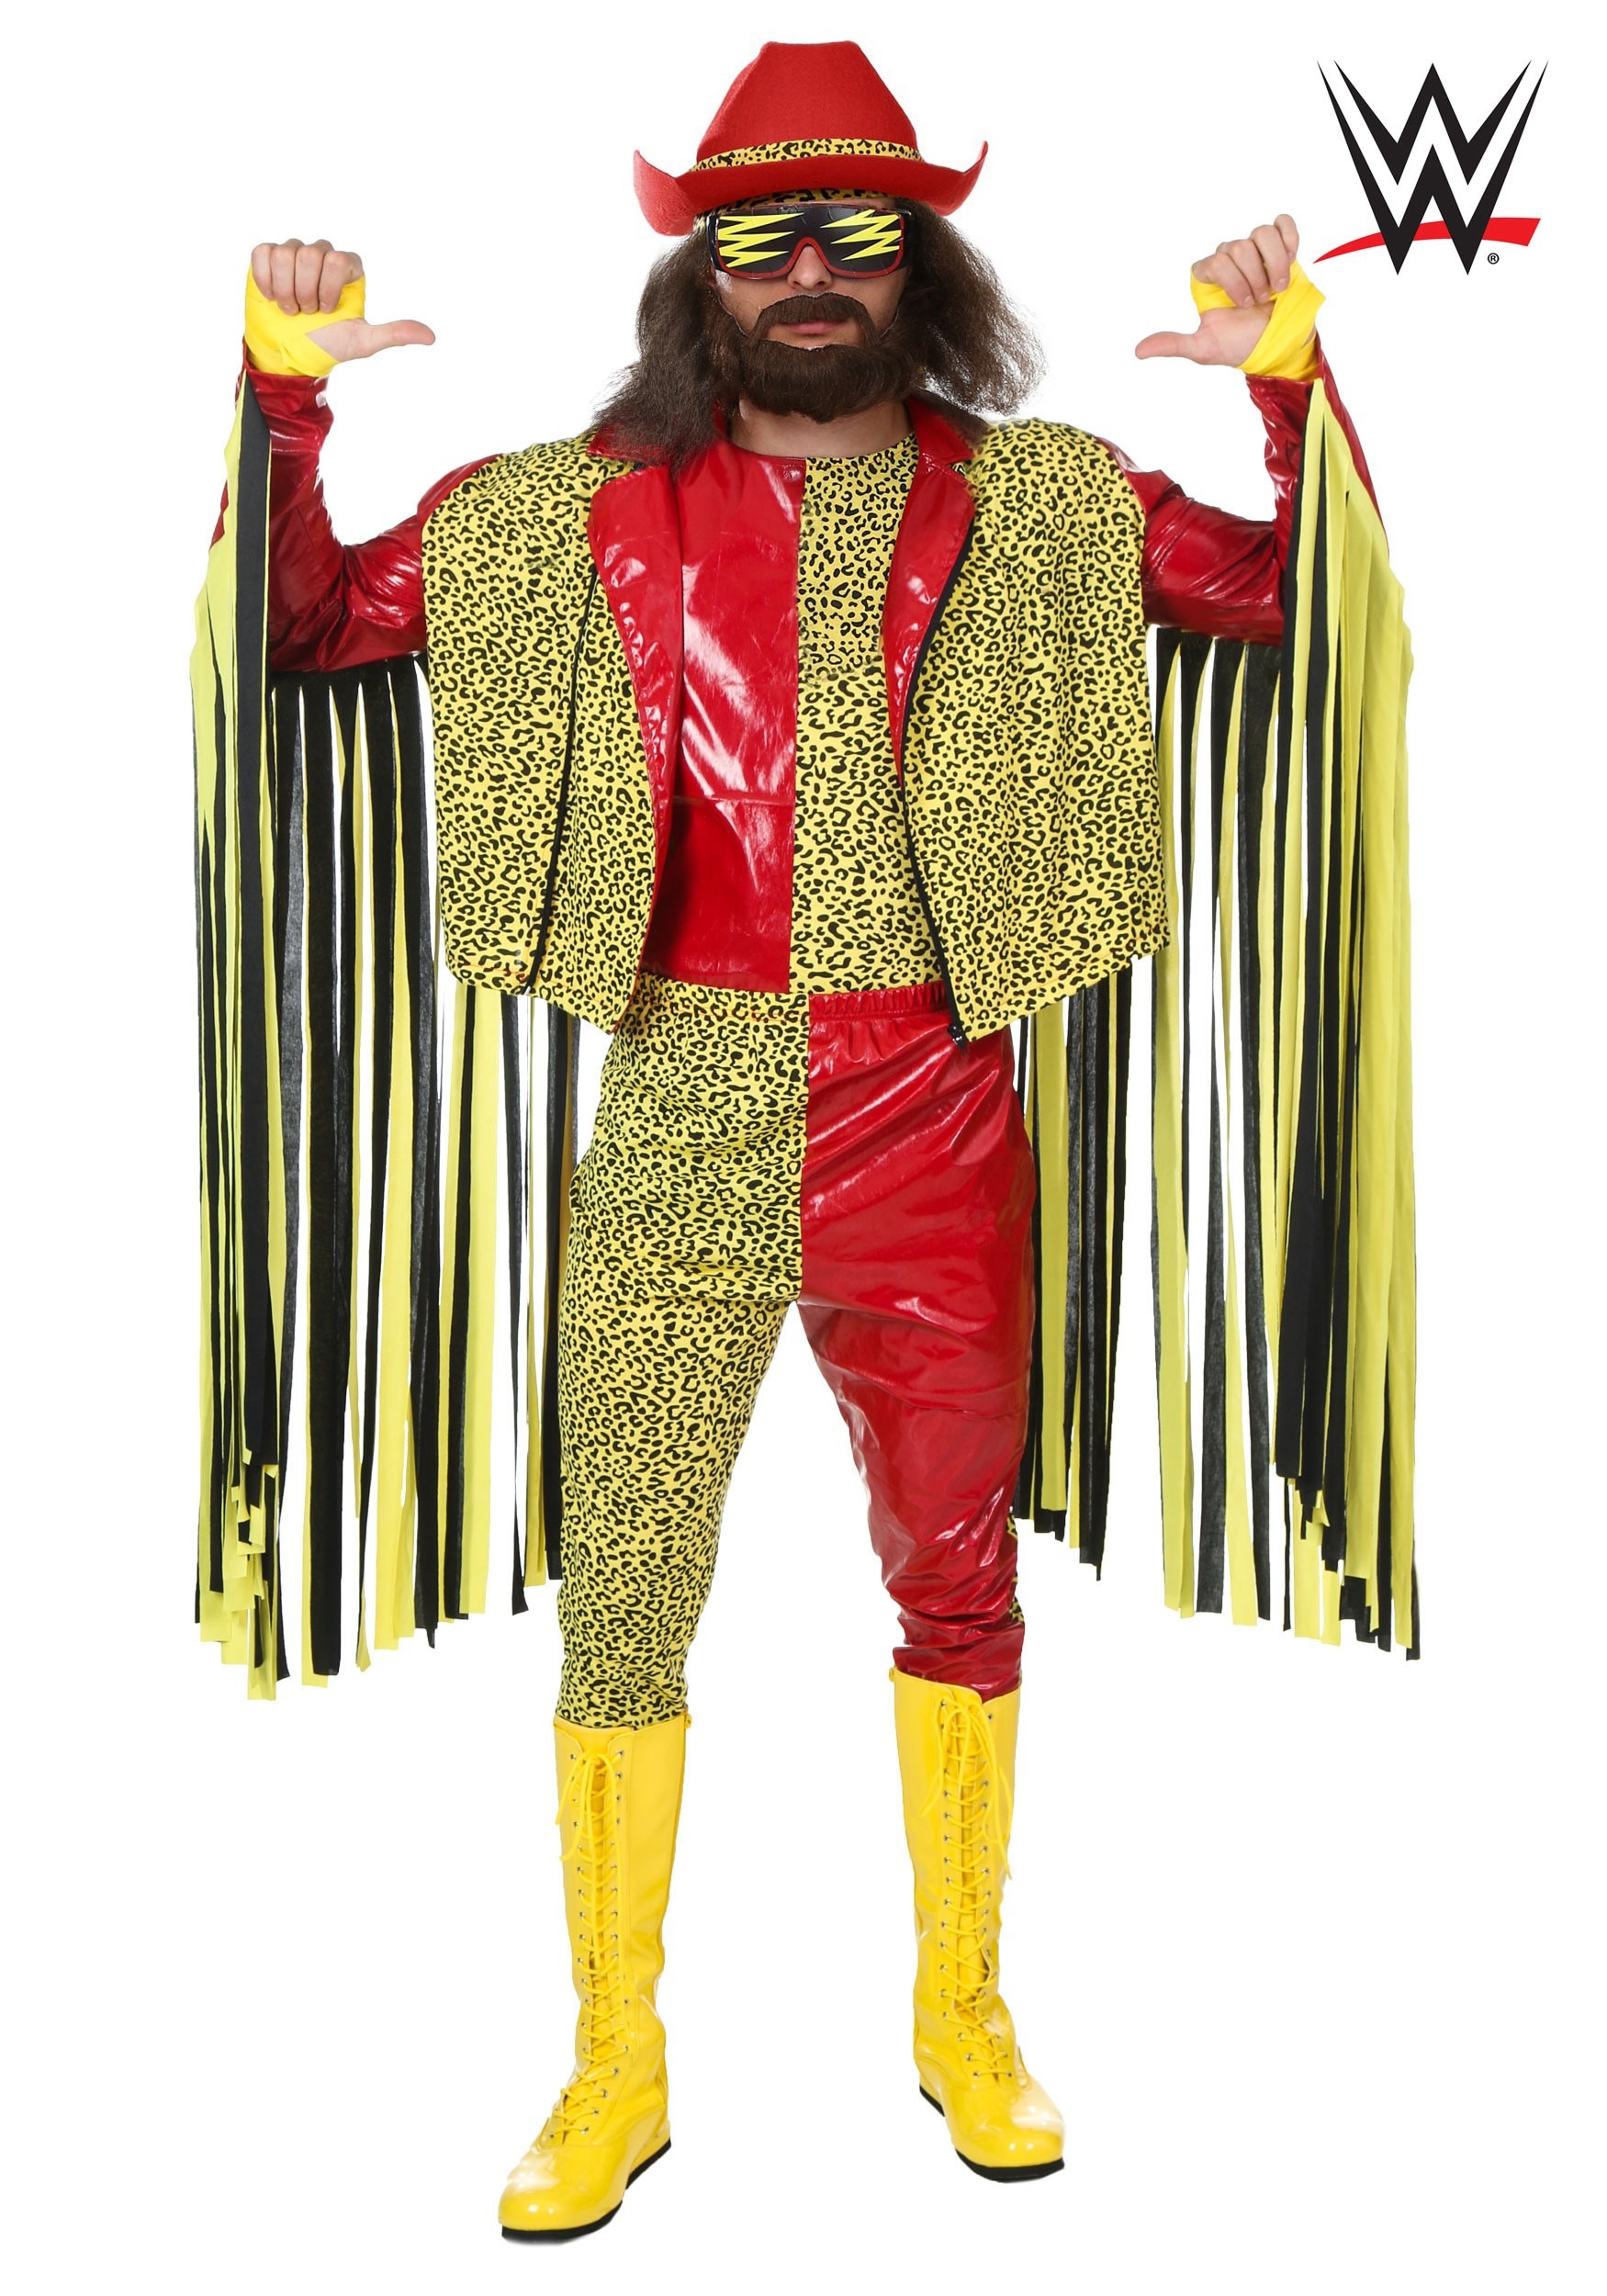 Macho Man Randy Savage: A Smaller WWE Wrestler With The Biggest